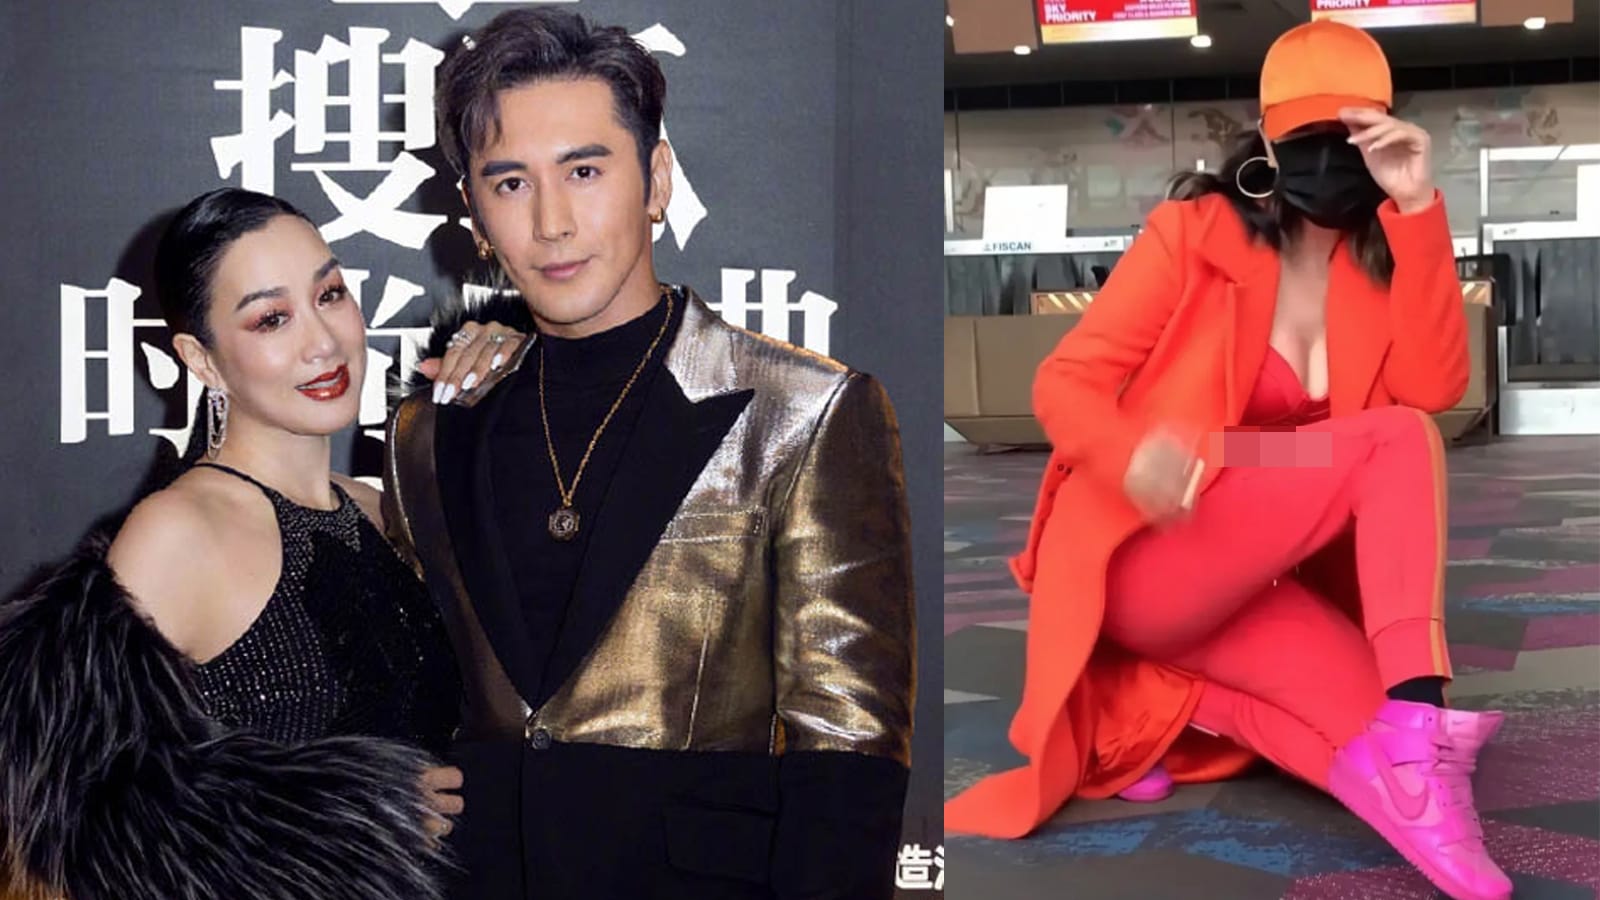 Video Of Christy Chung’s Husband Asking Her Why Her Outfit Is “So Revealing” Goes Viral